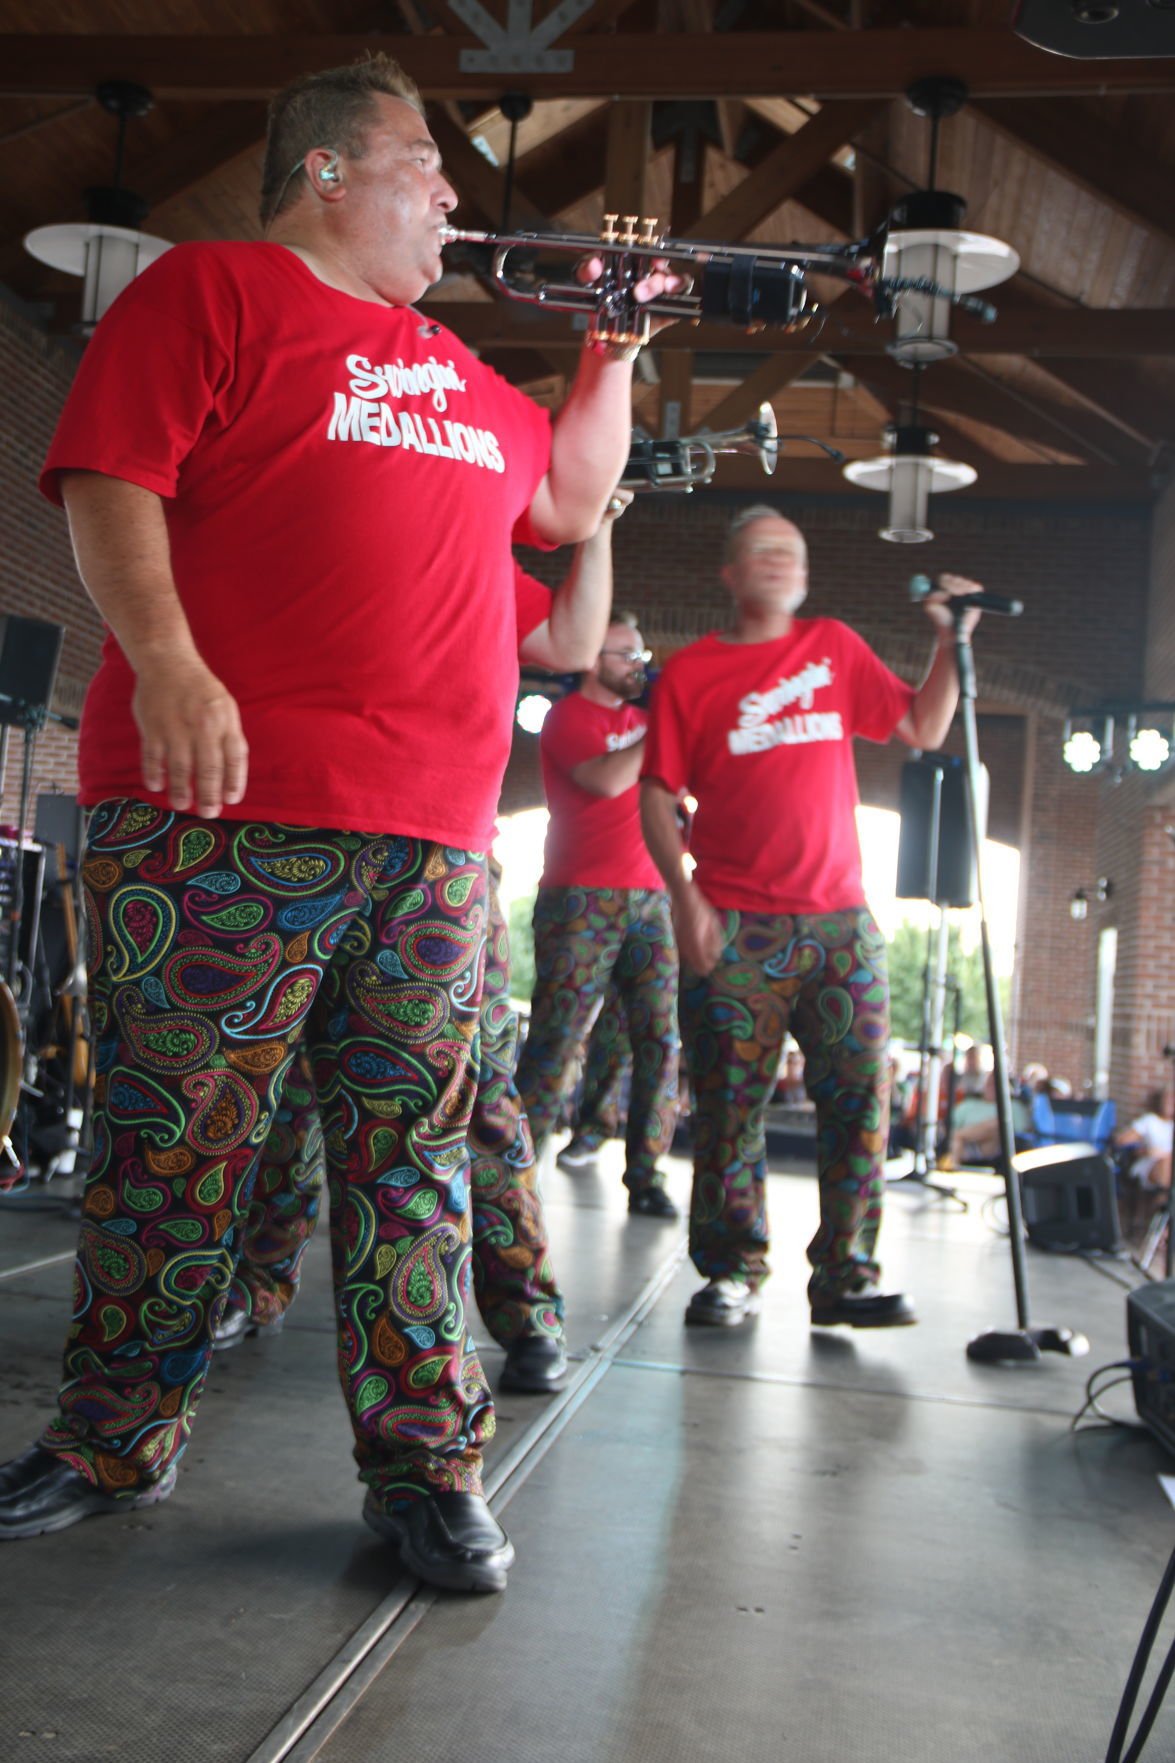 PHOTOS: The Swingin' Medallions kickoff Uptown Live fall concert series